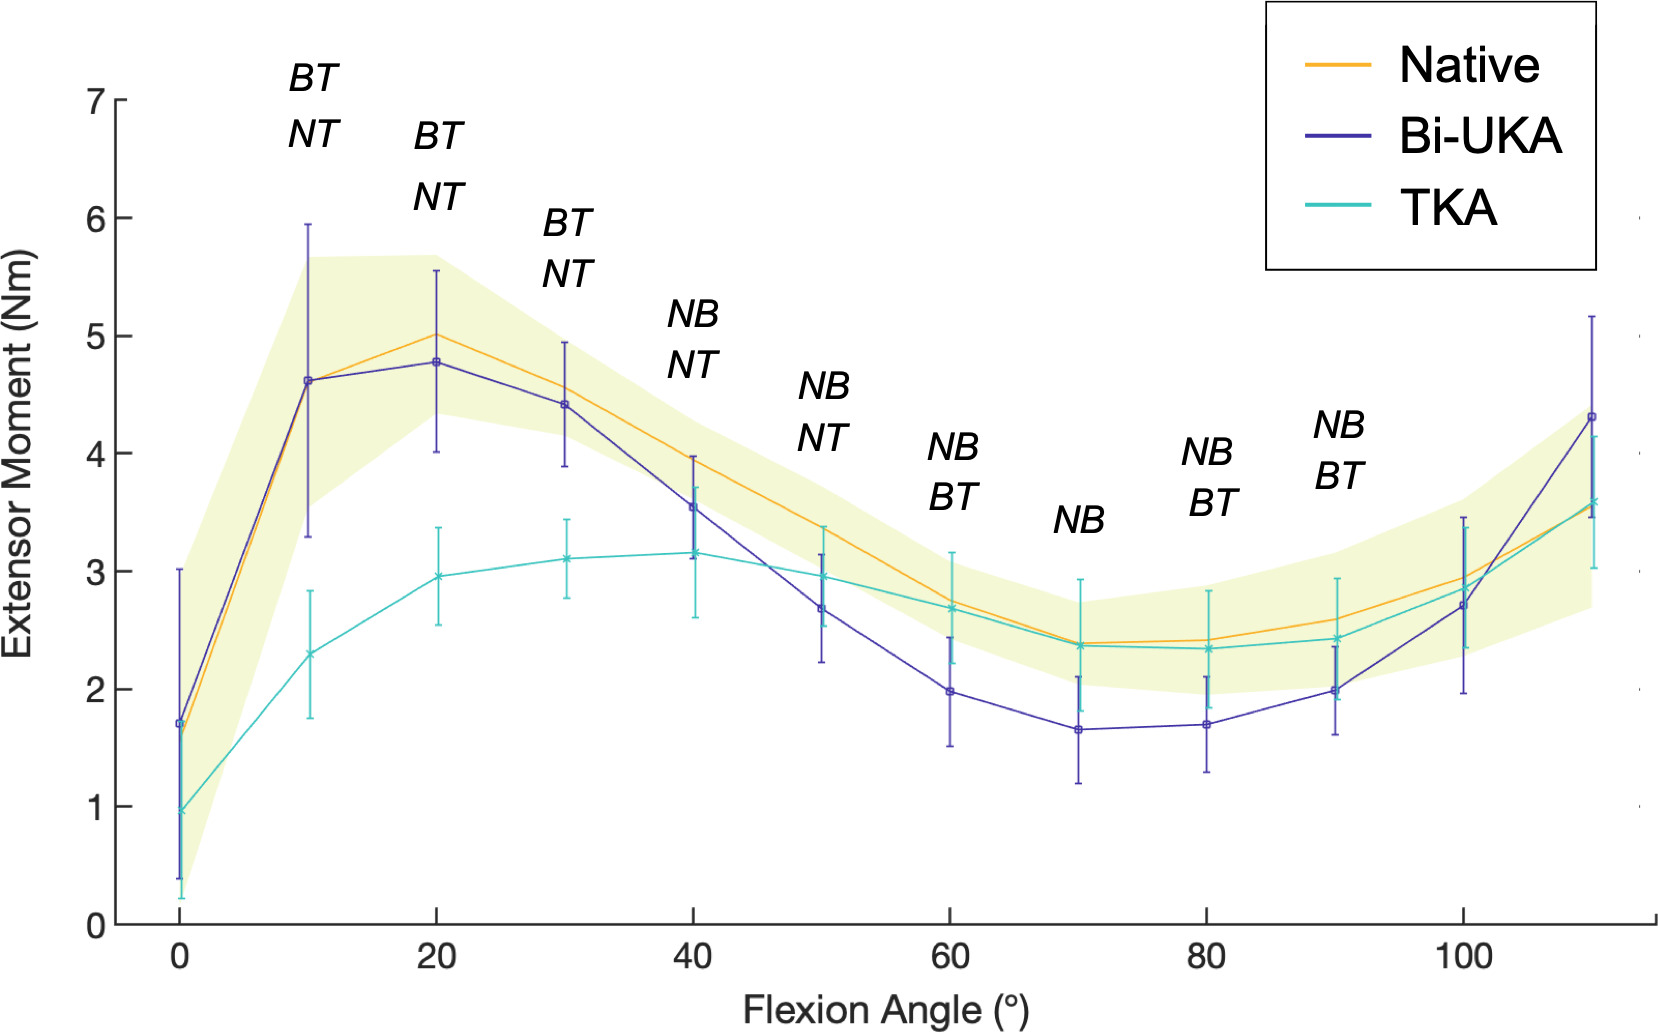 Fig. 8 
            Static flexion angles against mean extension moment (Nm) for native knees, bi-unicondylar arthroplasty (Bi-UKA) and total knee arthroplasty (TKA); 95% confidence intervals with a shaded yellow area for the native knee and bars for implanted knees. Italicized letters indicate pairwise statistical differences (p < 0.05). BT, Bi-UKA versus TKA; NB, native versus Bi-UKA; NT, native versus TKA.
          